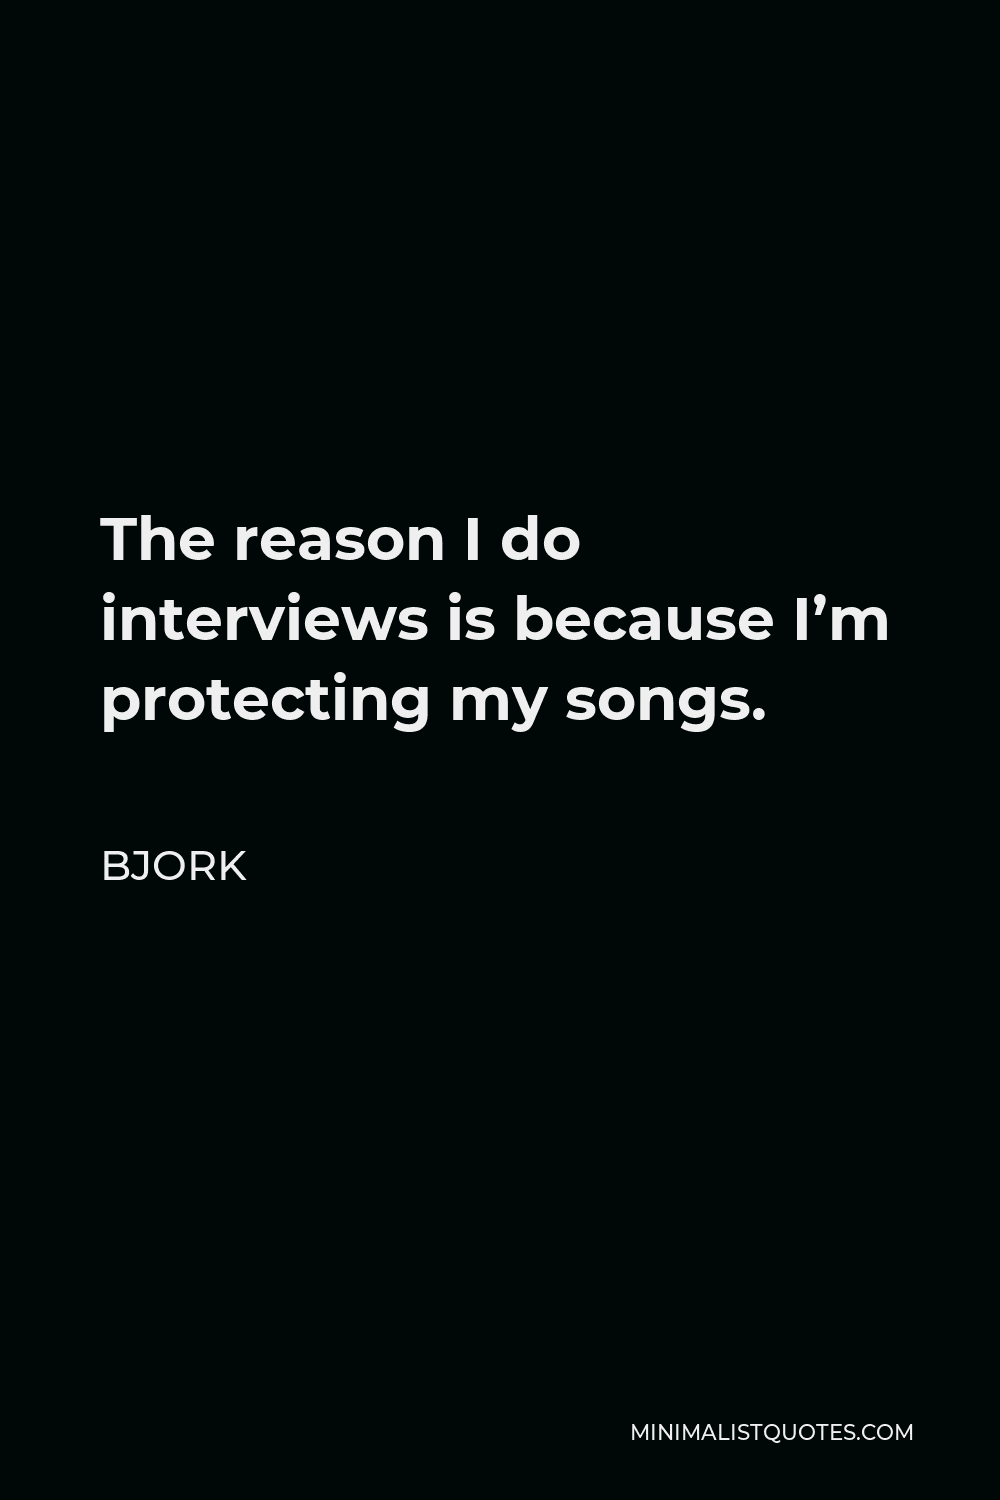 Bjork Quote - The reason I do interviews is because I’m protecting my songs.